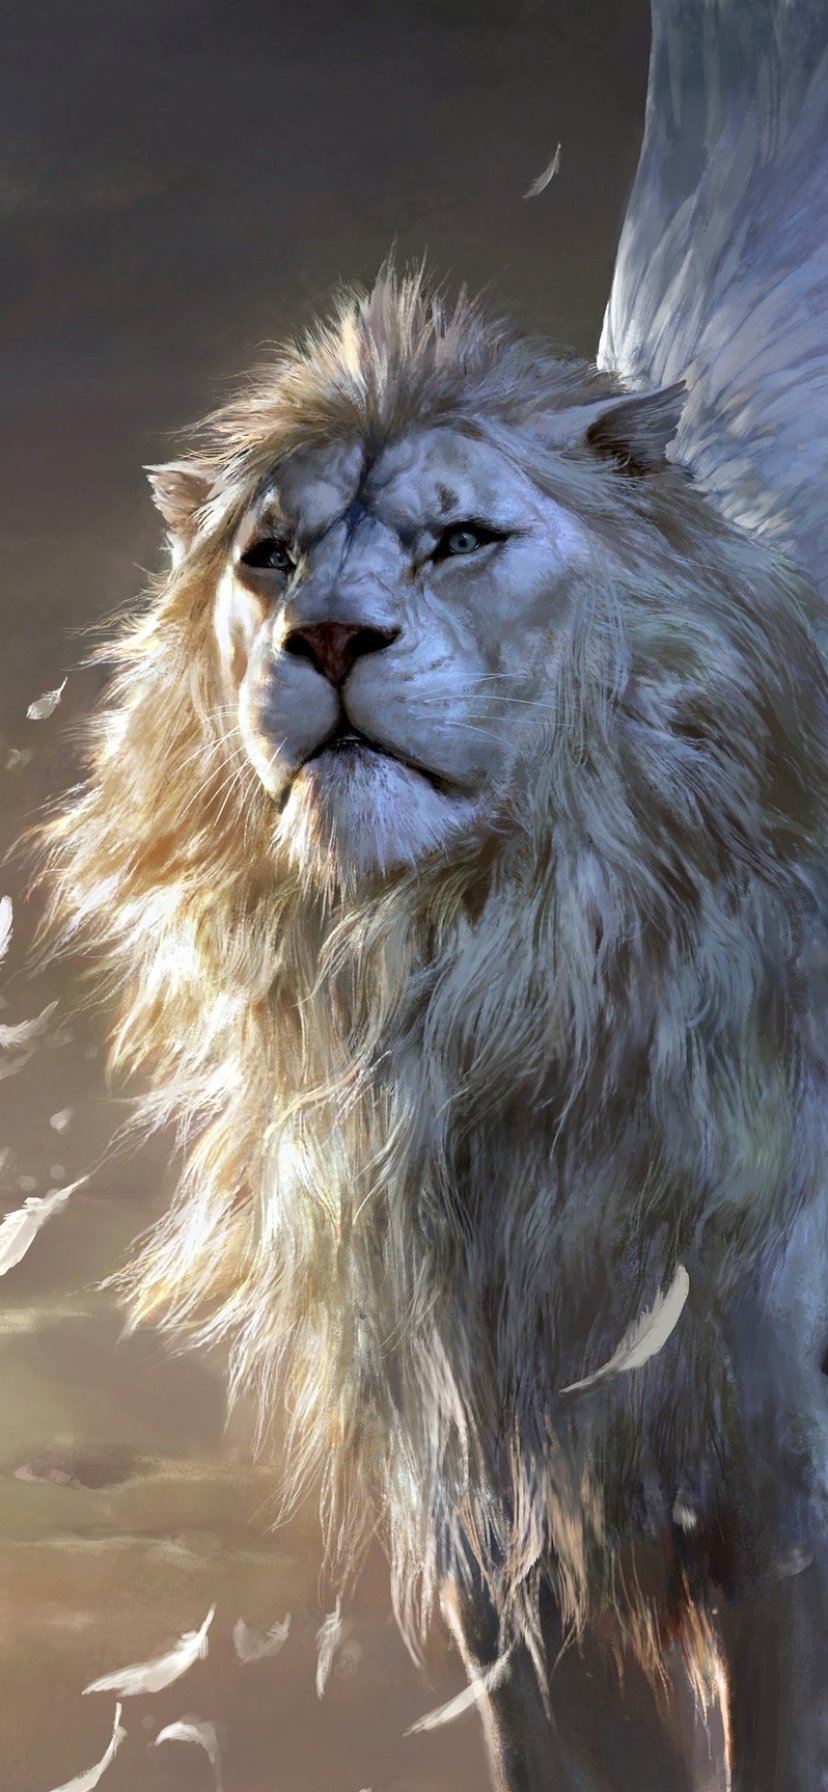 Fantasy Lion Wallpapers